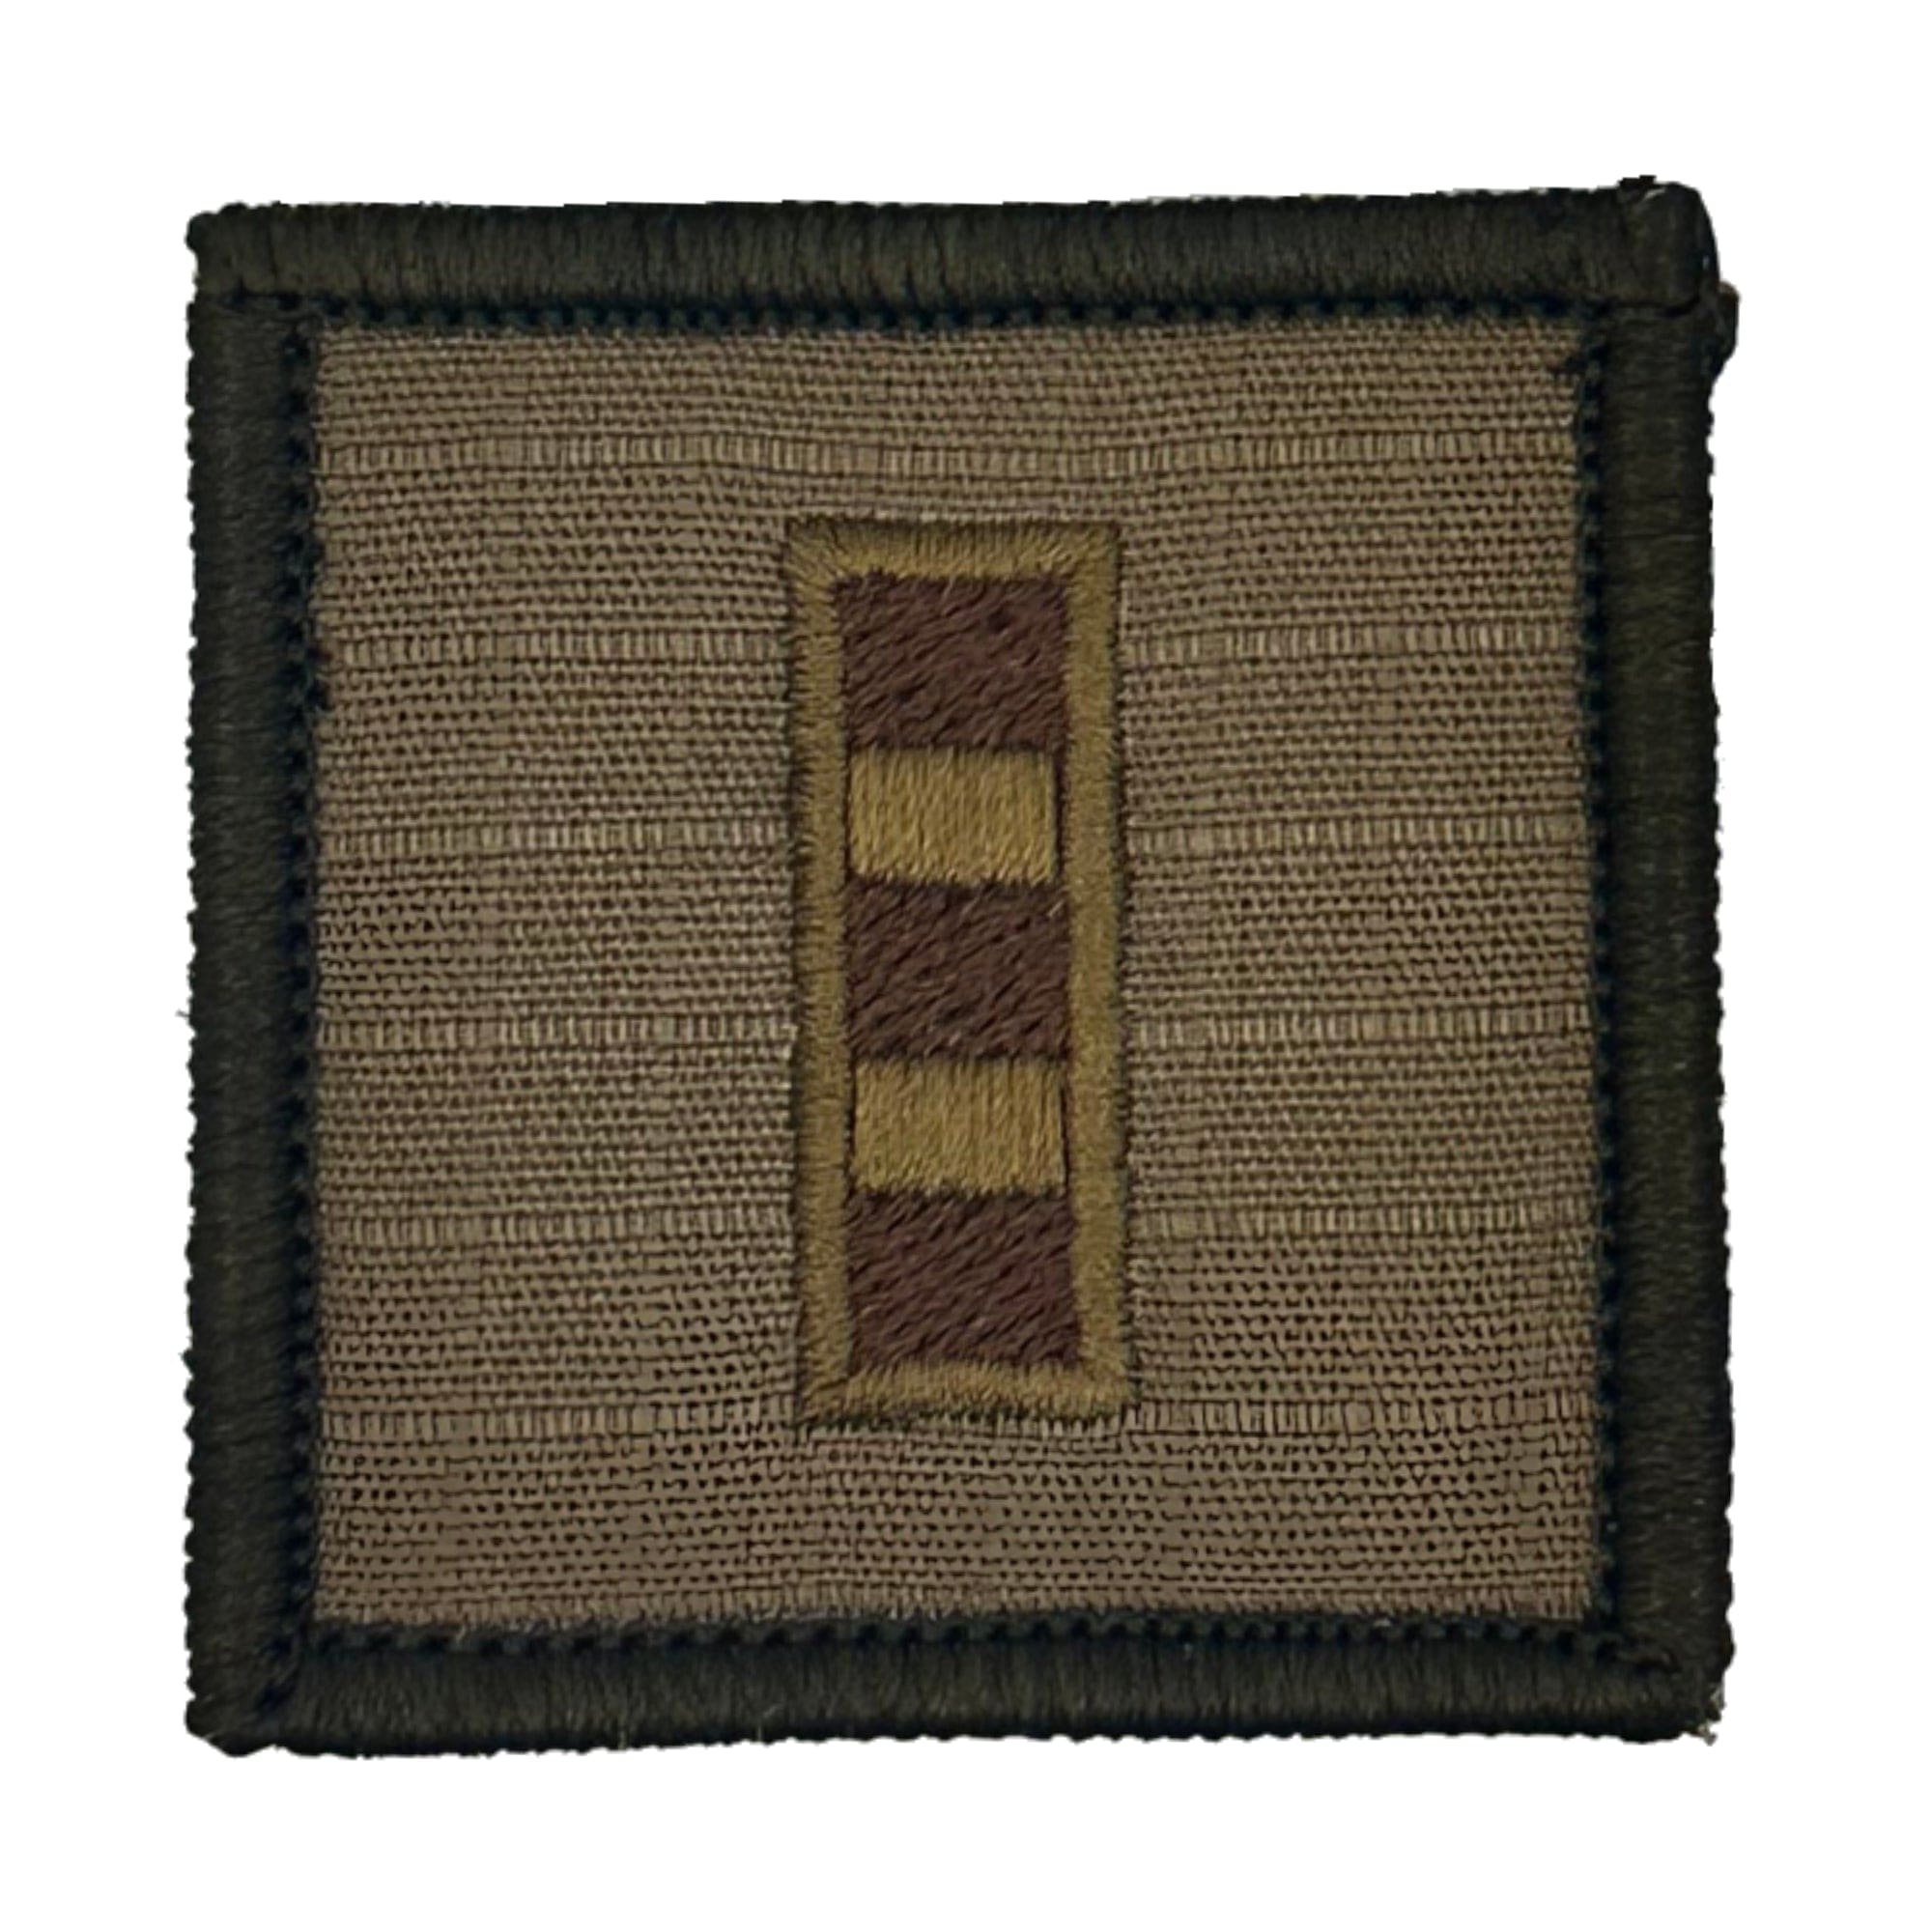 Tactical Gear Junkie Patches Coyote Brown / Chief Warrant Officer 2 USMC Rank Insignia - 2x2 Patch